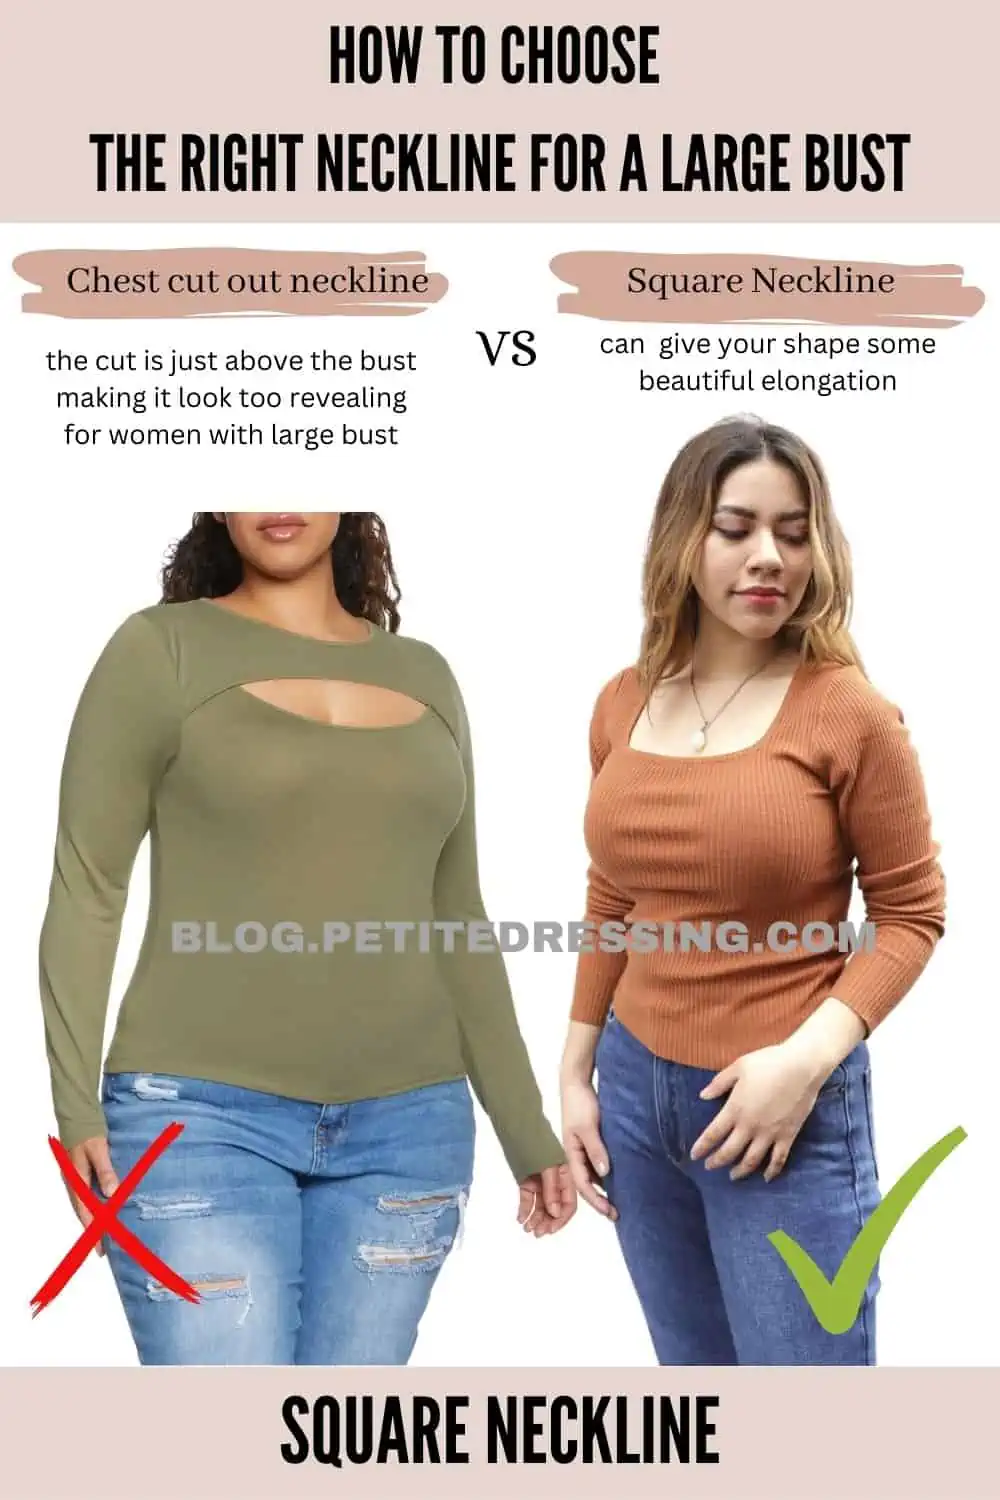 How to Choose the Right Neckline for a Large Bust - Petite Dressing